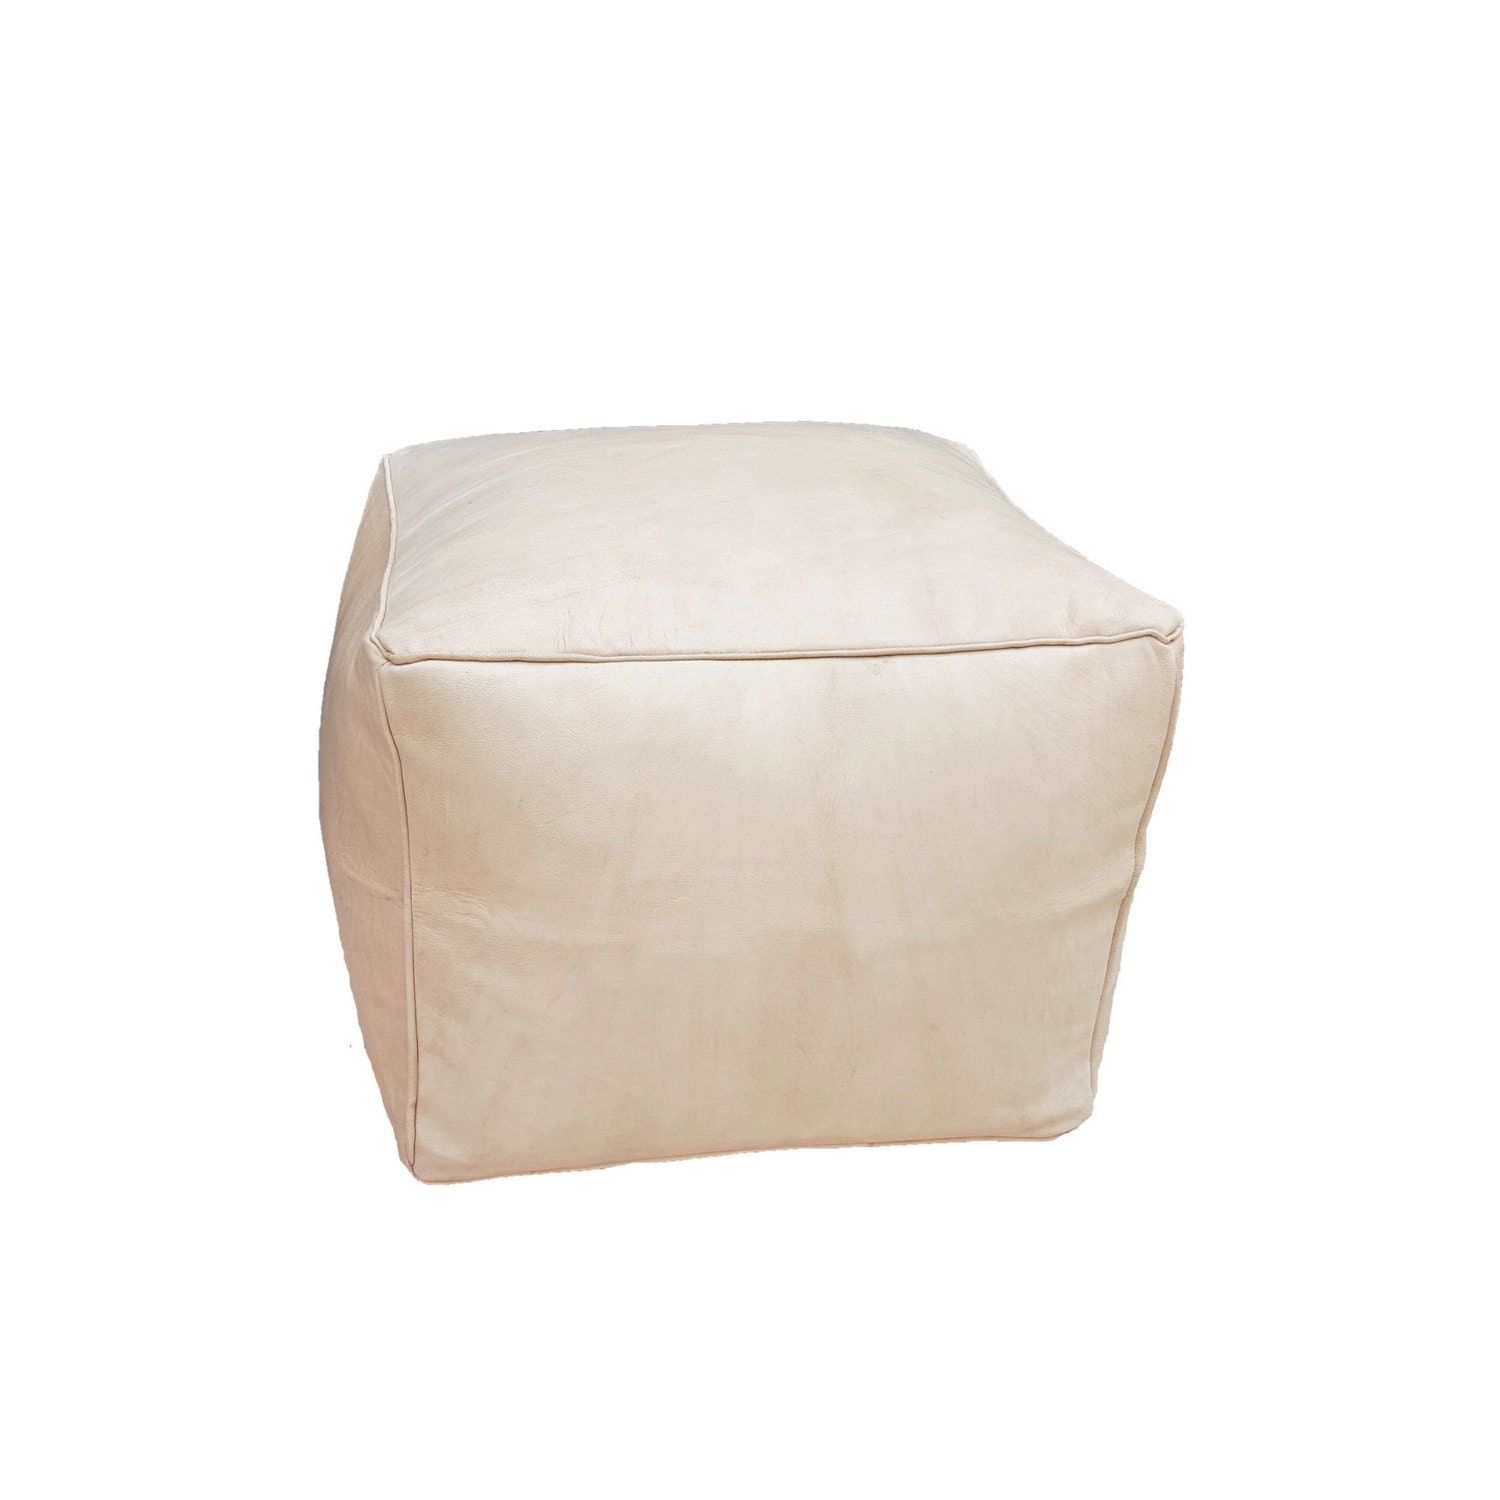 Leather Pouf Ottoman Natural Beige Leather Cube Big (View 6 of 20)